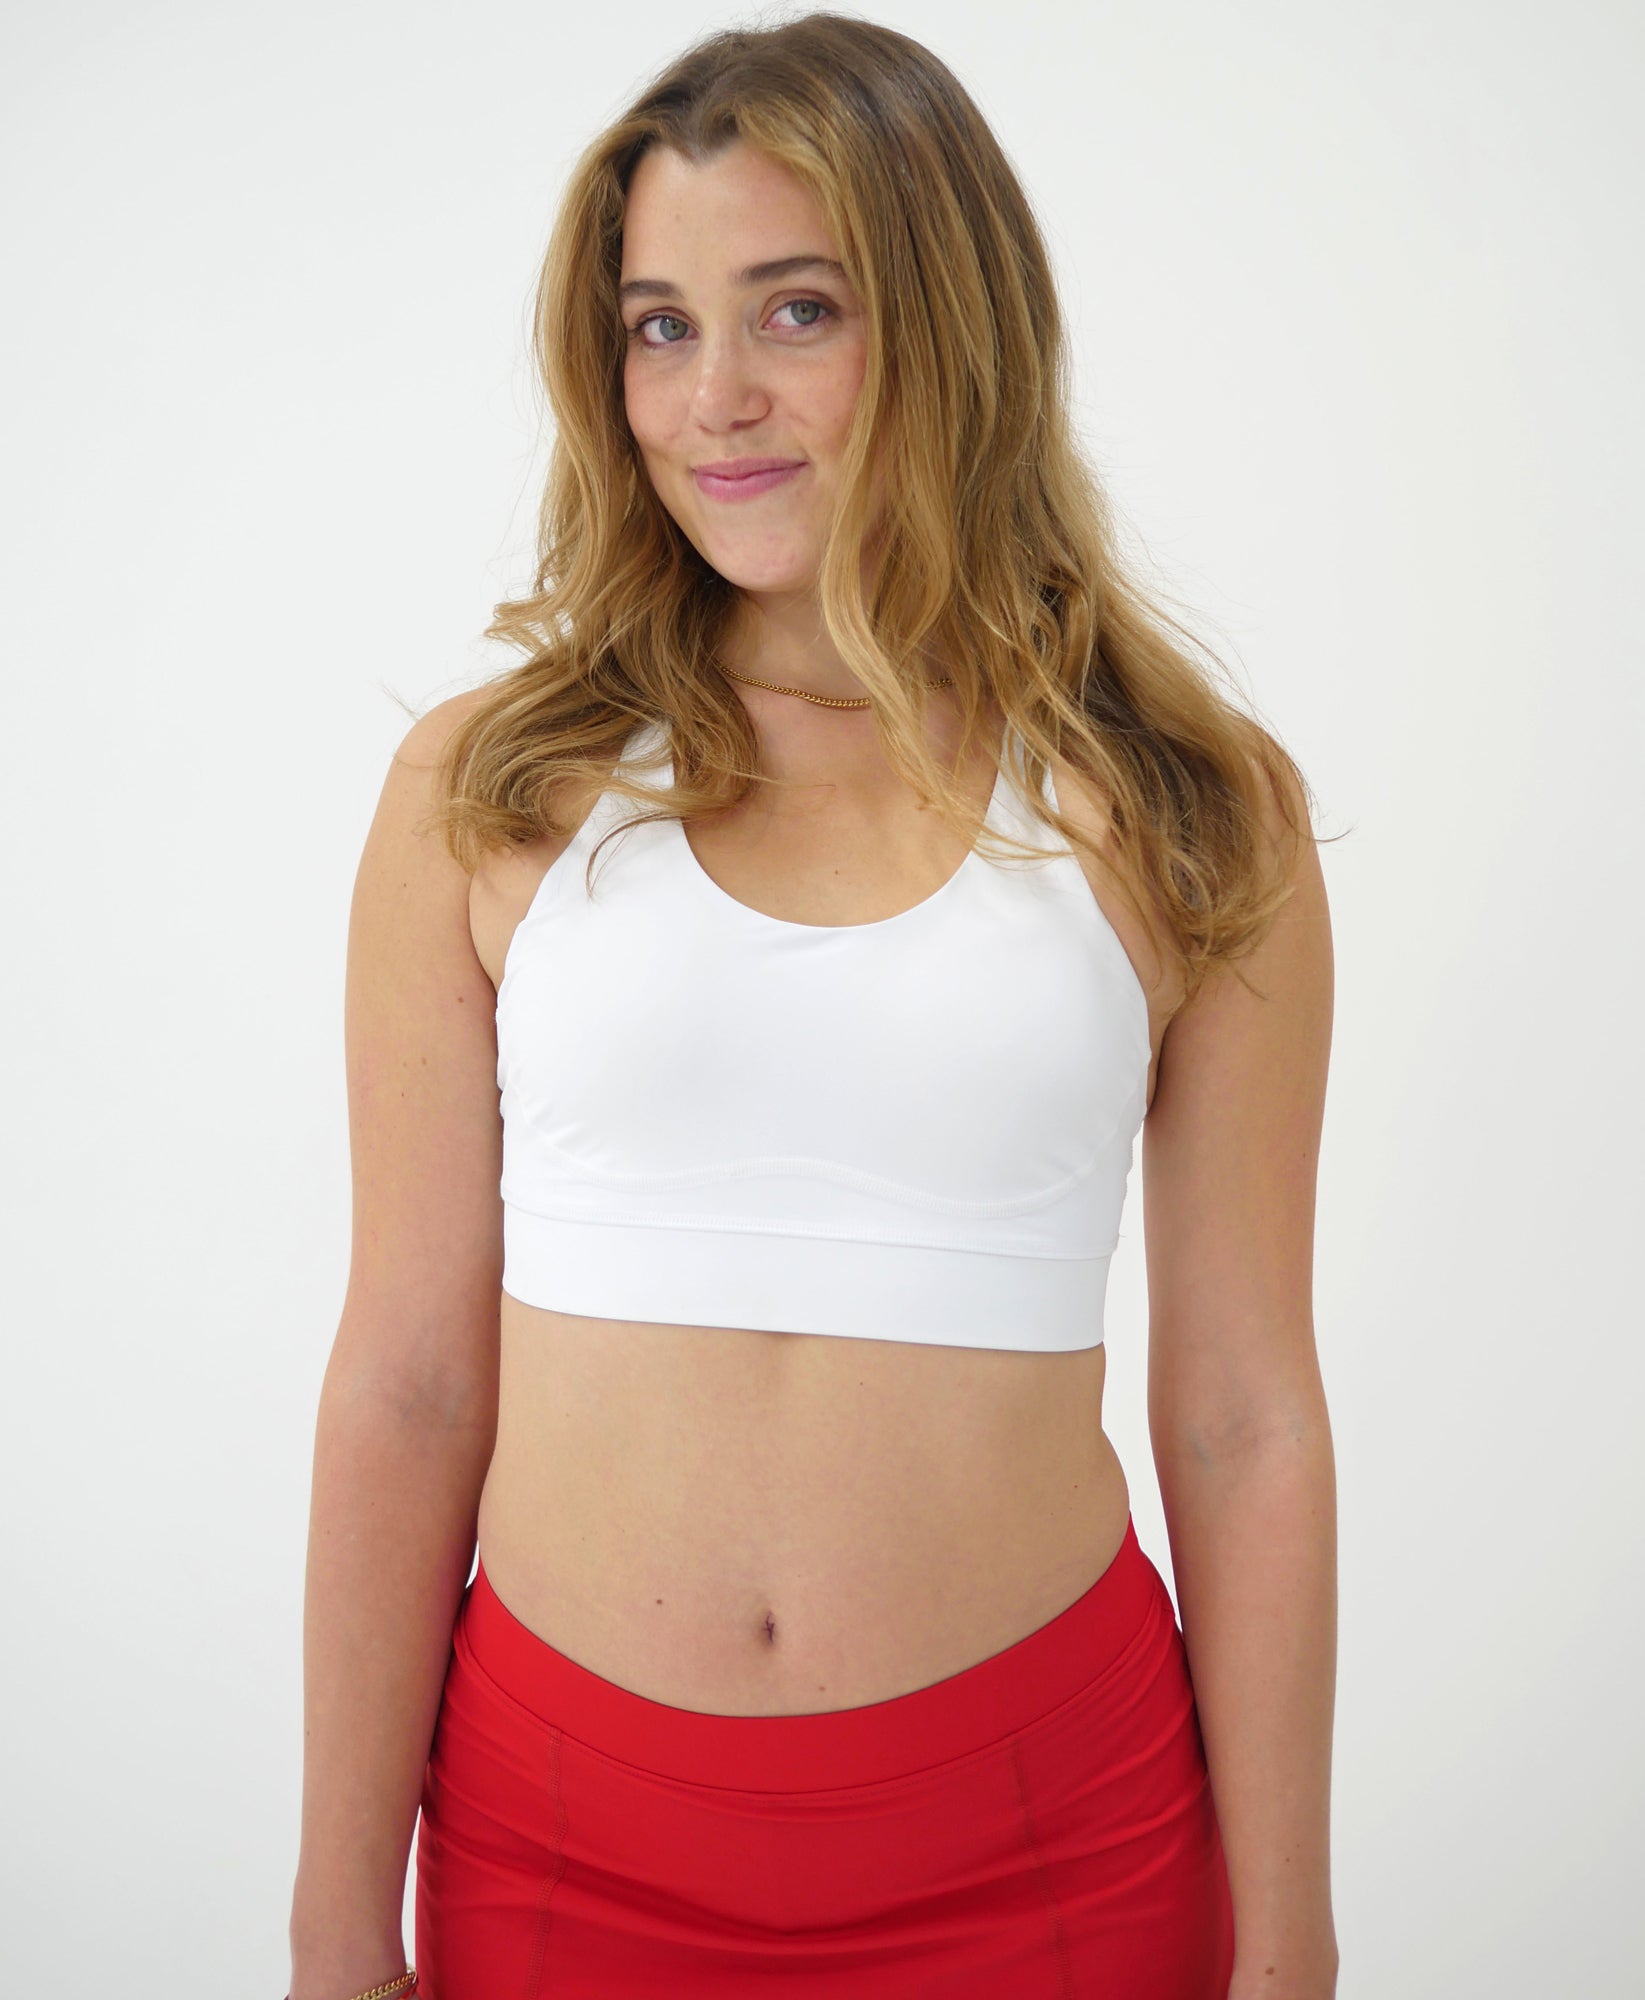 Women's Cross Back Crop Bra in Arctic with Moisture Wicking – Wear One's At